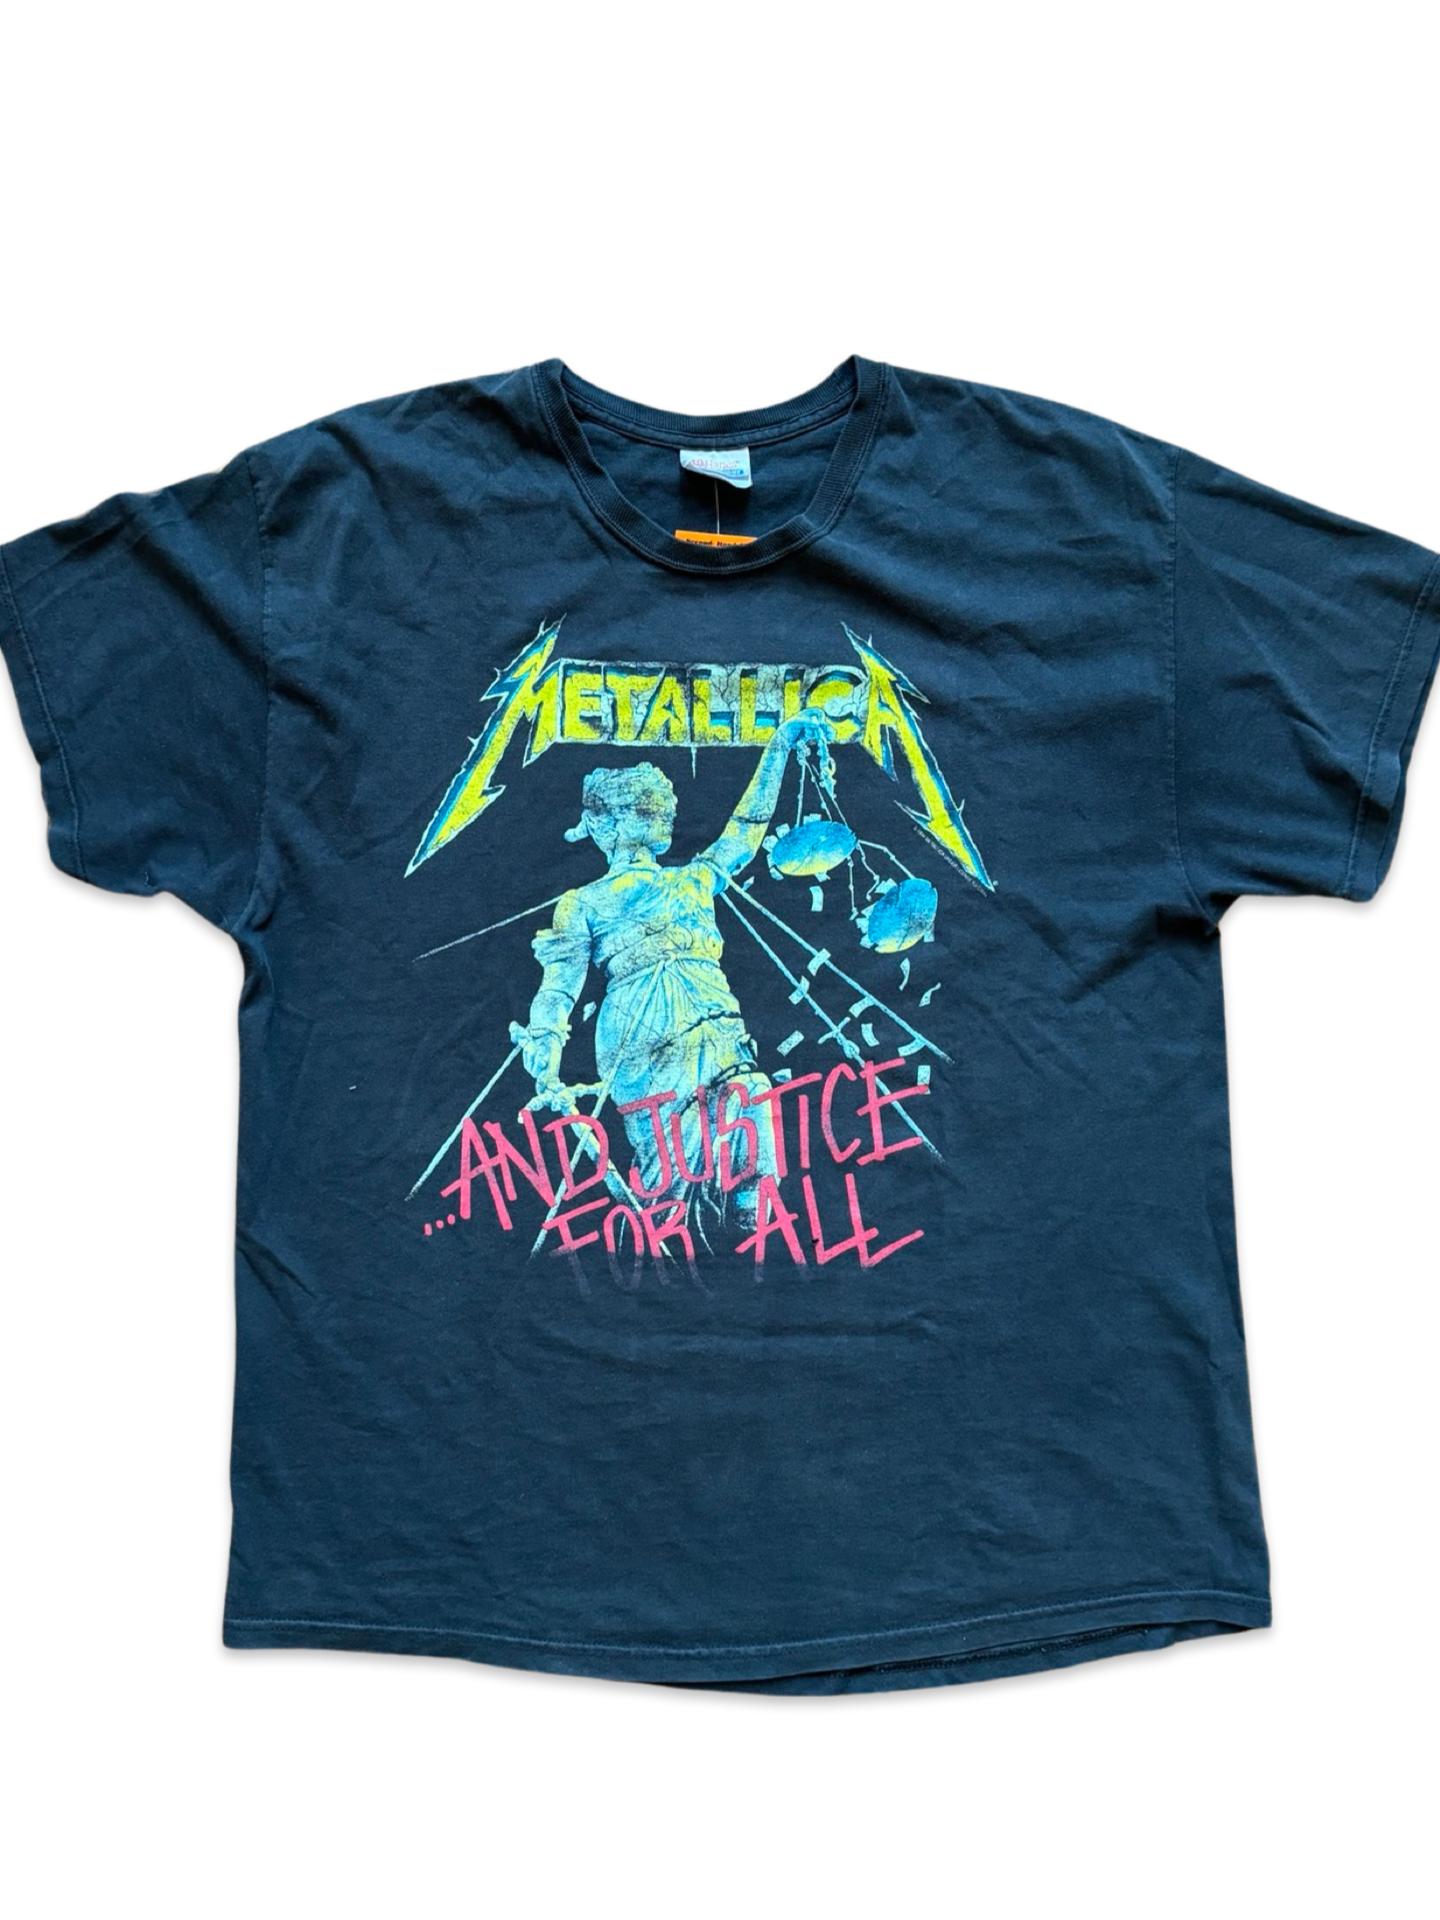 90s METALLICA JUSTICE FOR ALL FITS XL-